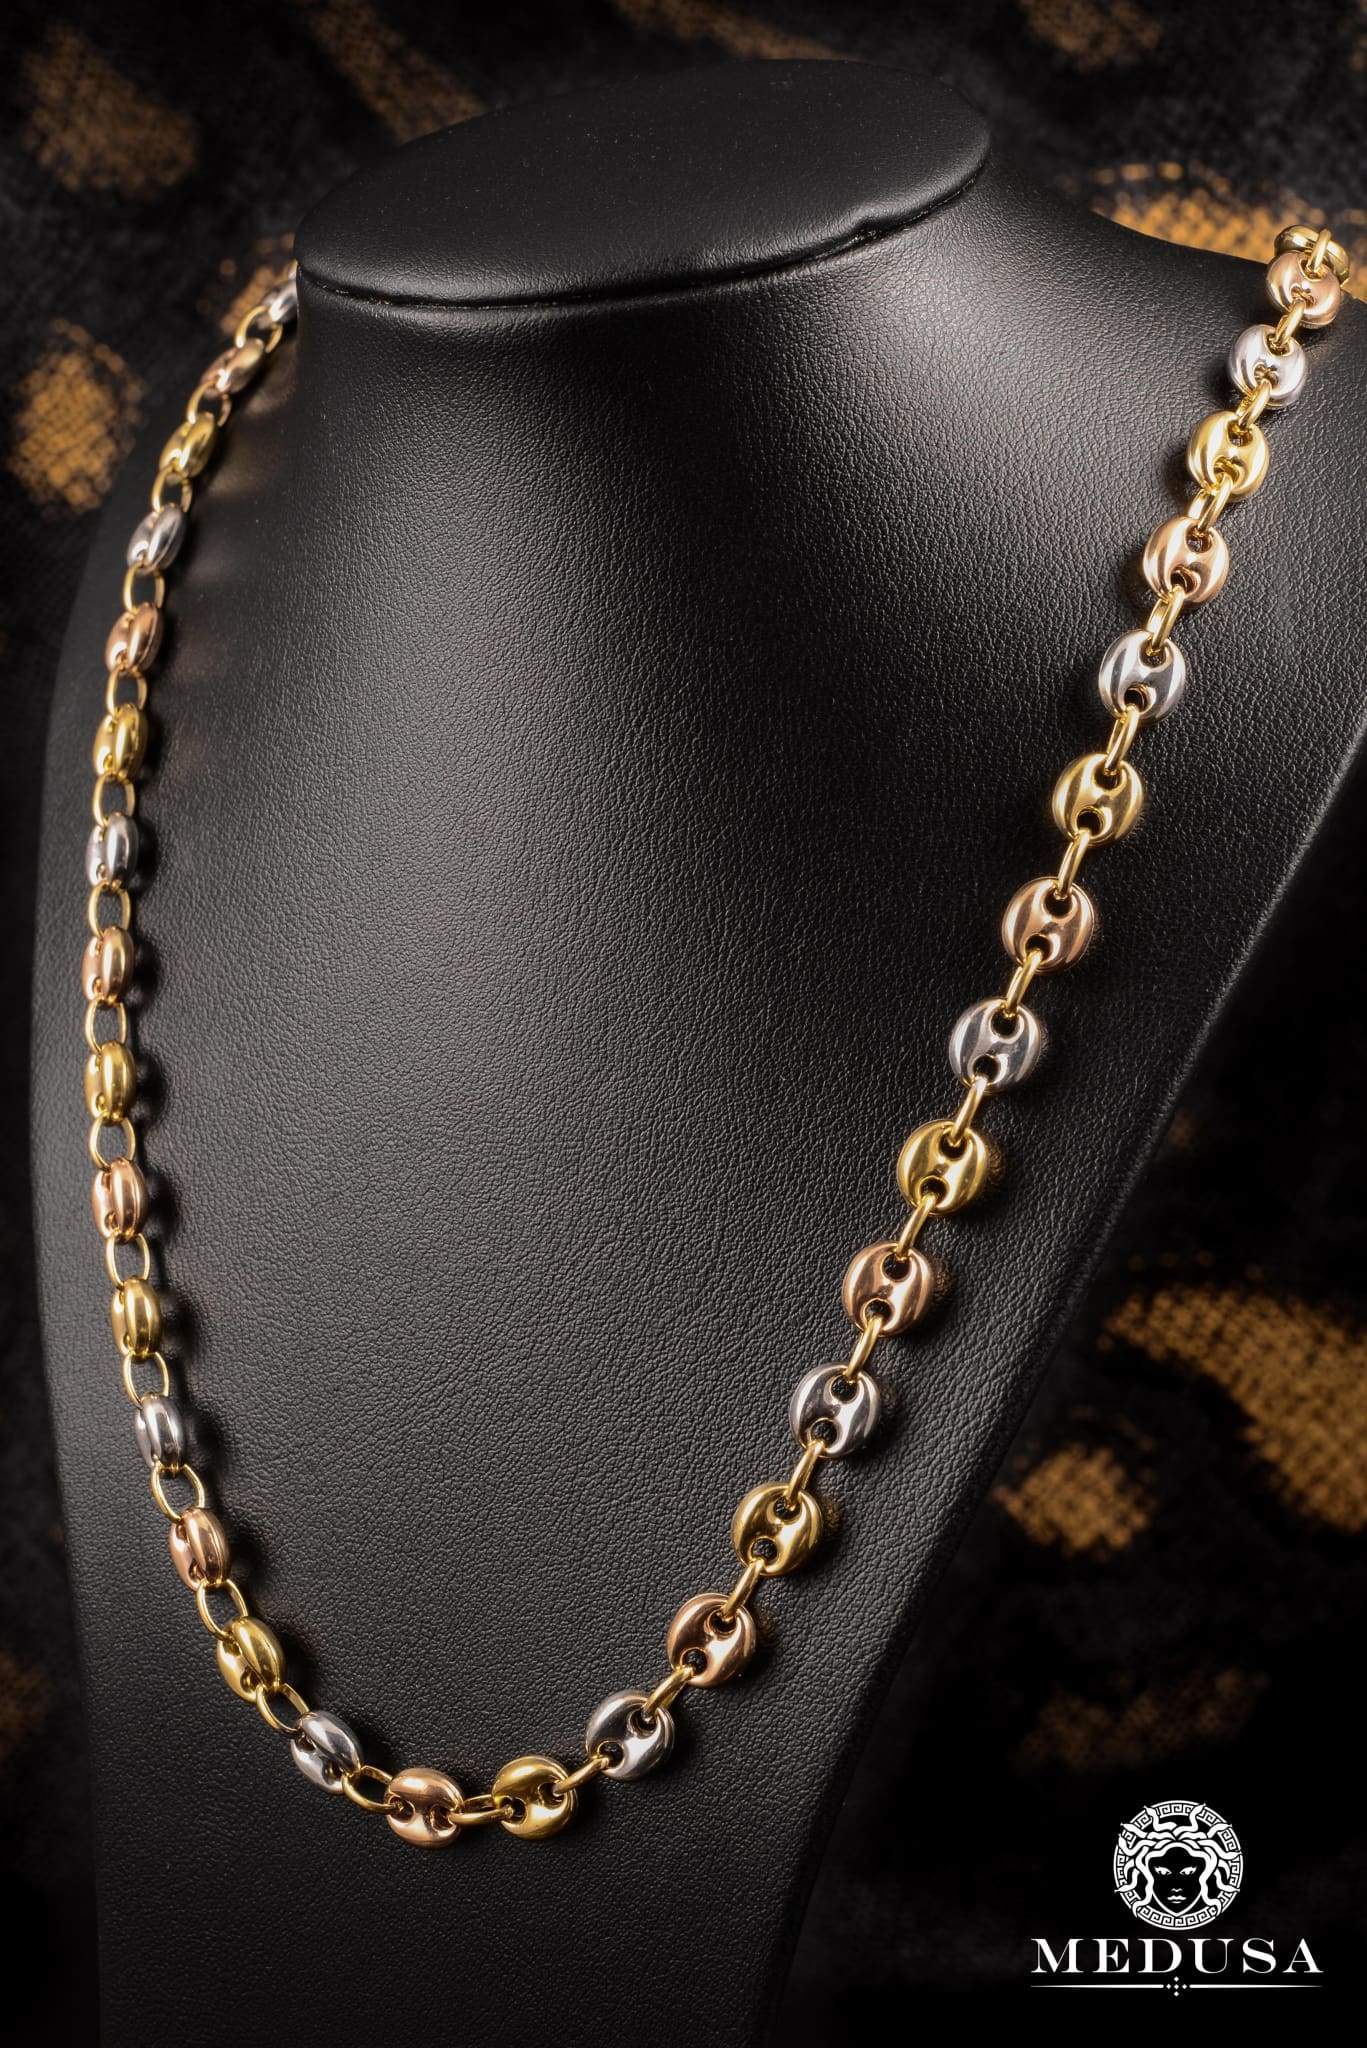 10K Gold Chain | Chain 7mm Gucci Puff Link 3 Tones